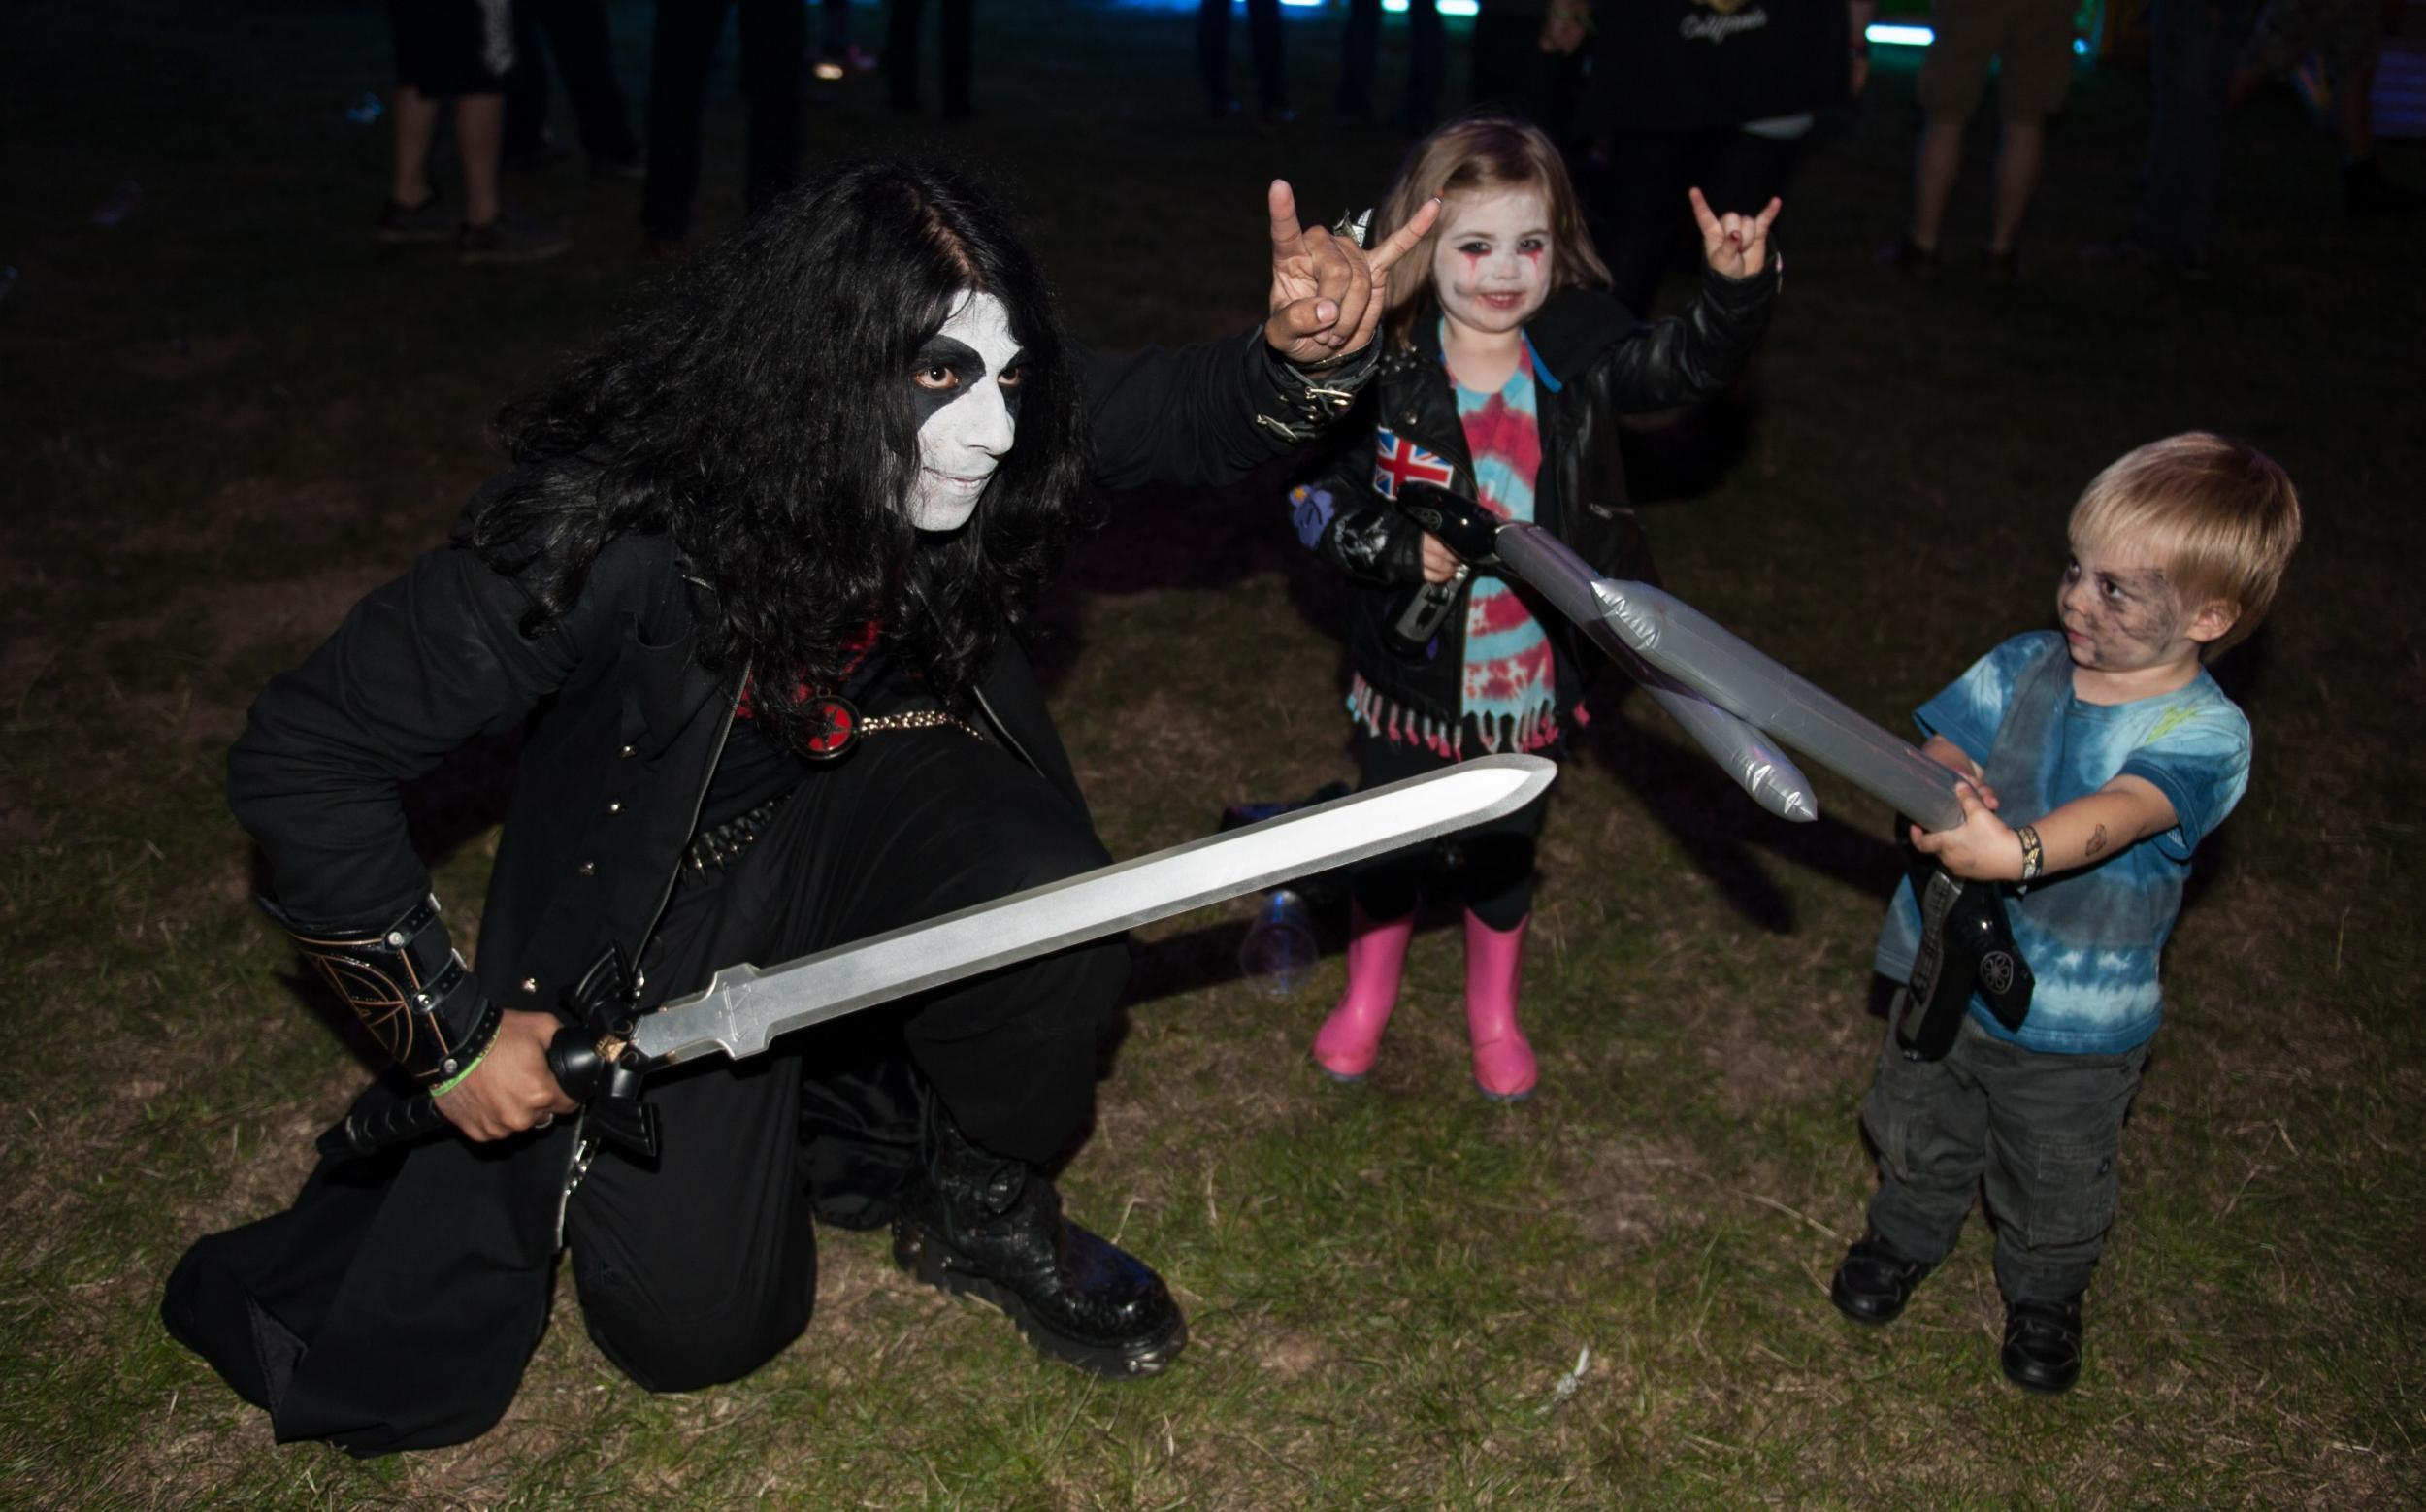 Bloodstock has organically created an atypical family friendly environment onsite